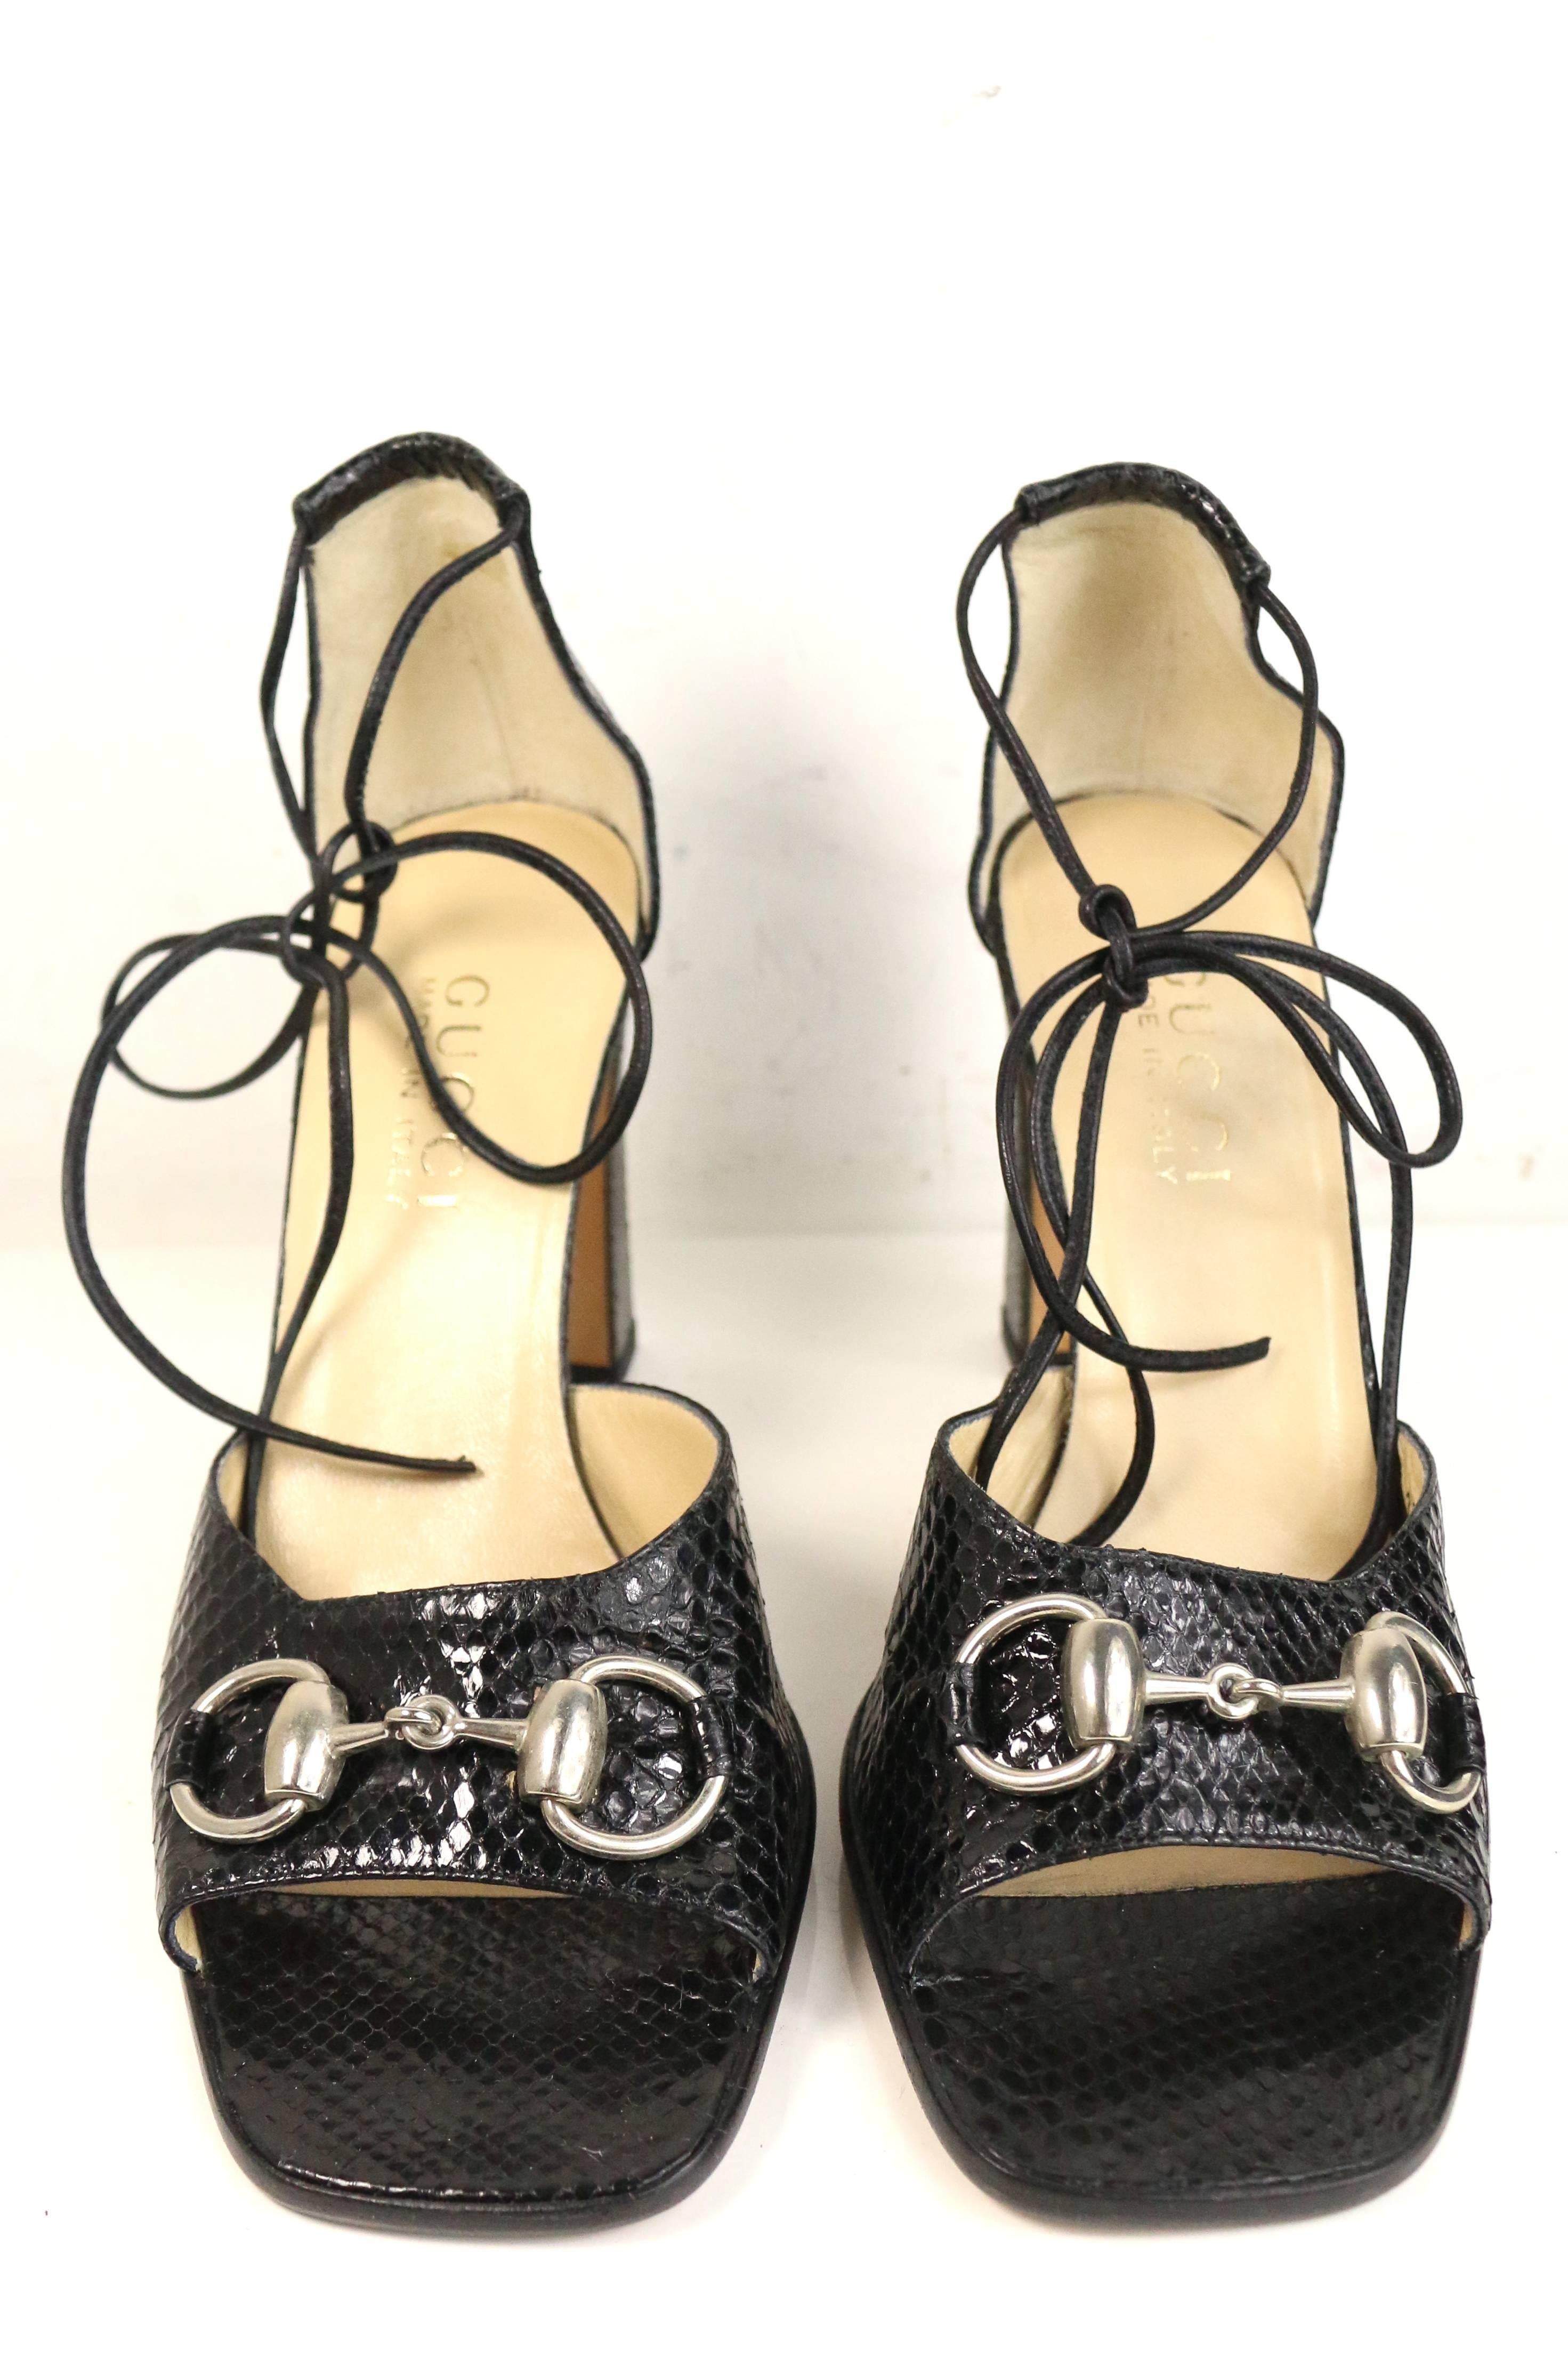 - Vintage Gucci by Tom Ford black python open toe sandals heels from Fall 1996 collection. Featuring the classic signature silver buckle and black lace up.  Tom Ford really knows how to make women look sexy all the time!!!   

- Made in Italy.   

-